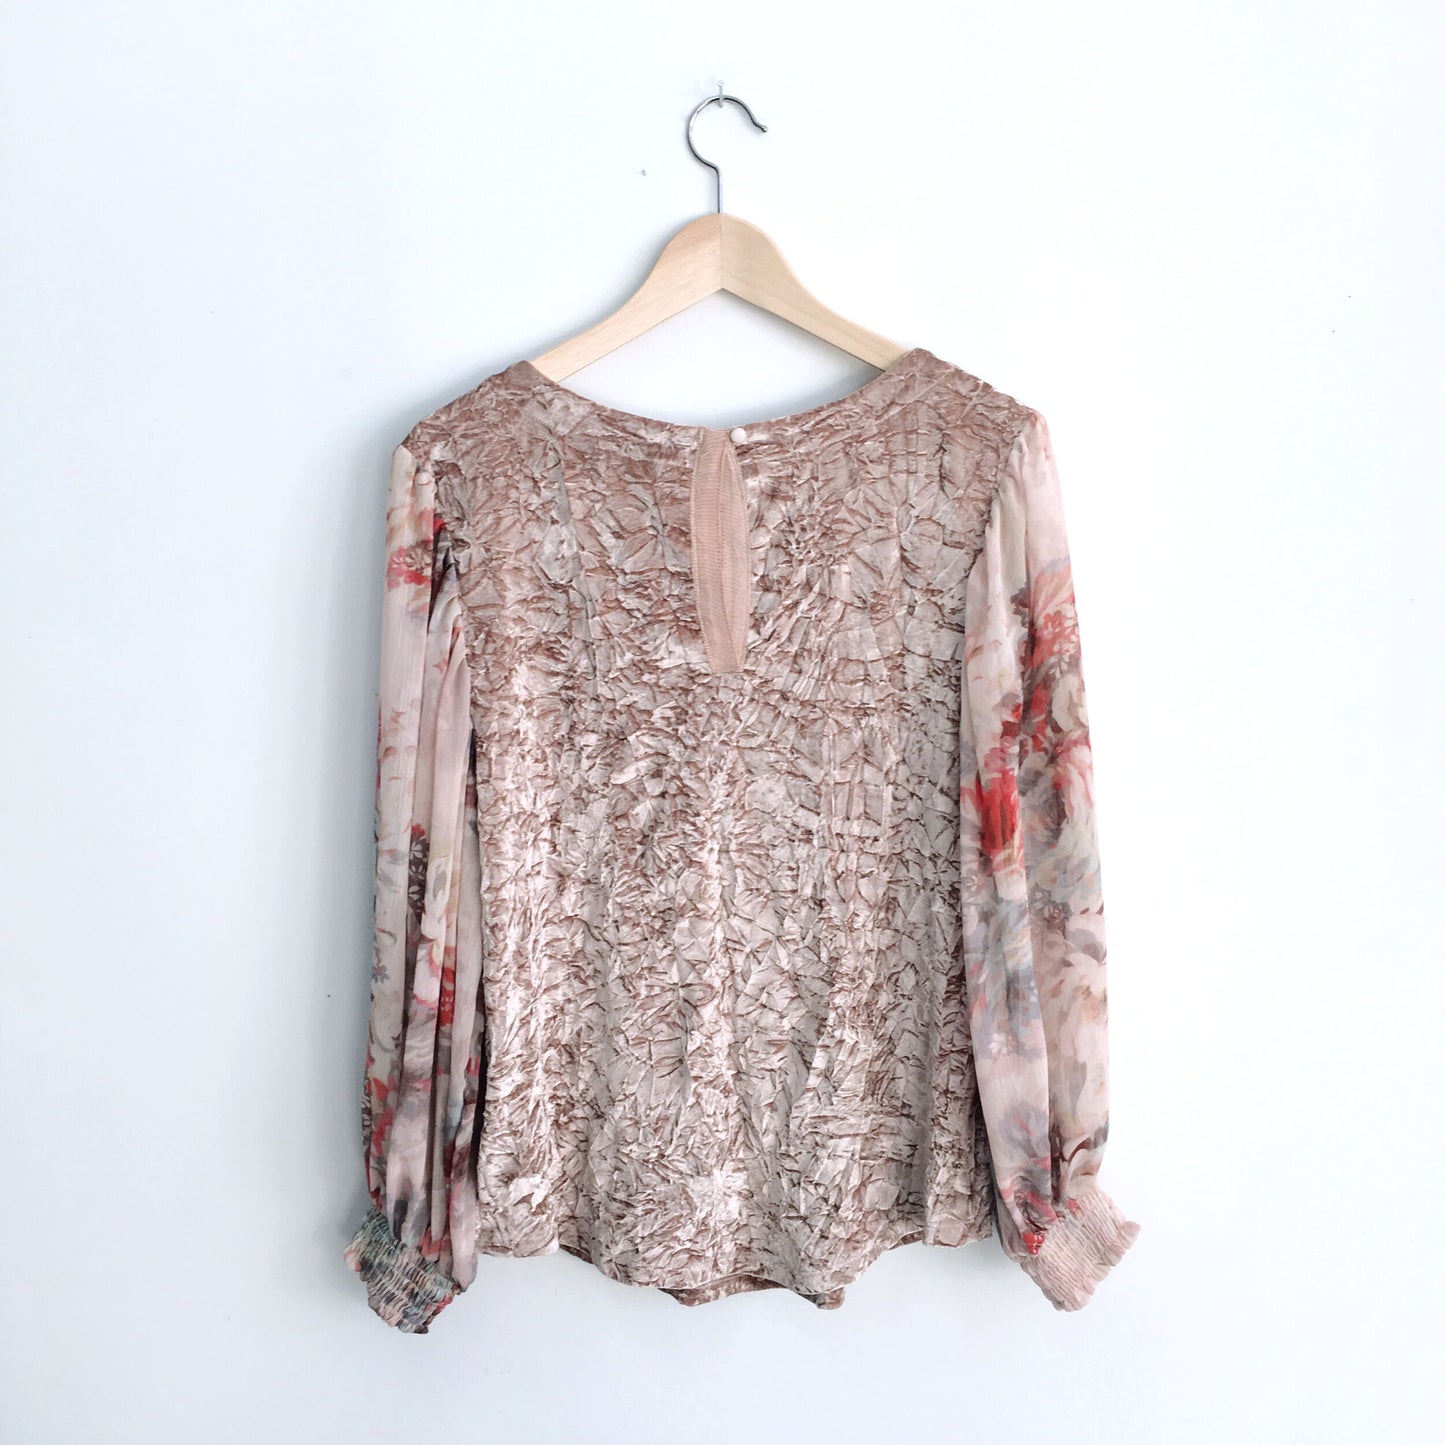 🎄Meadow Rue crushed velvet floral top - size Small